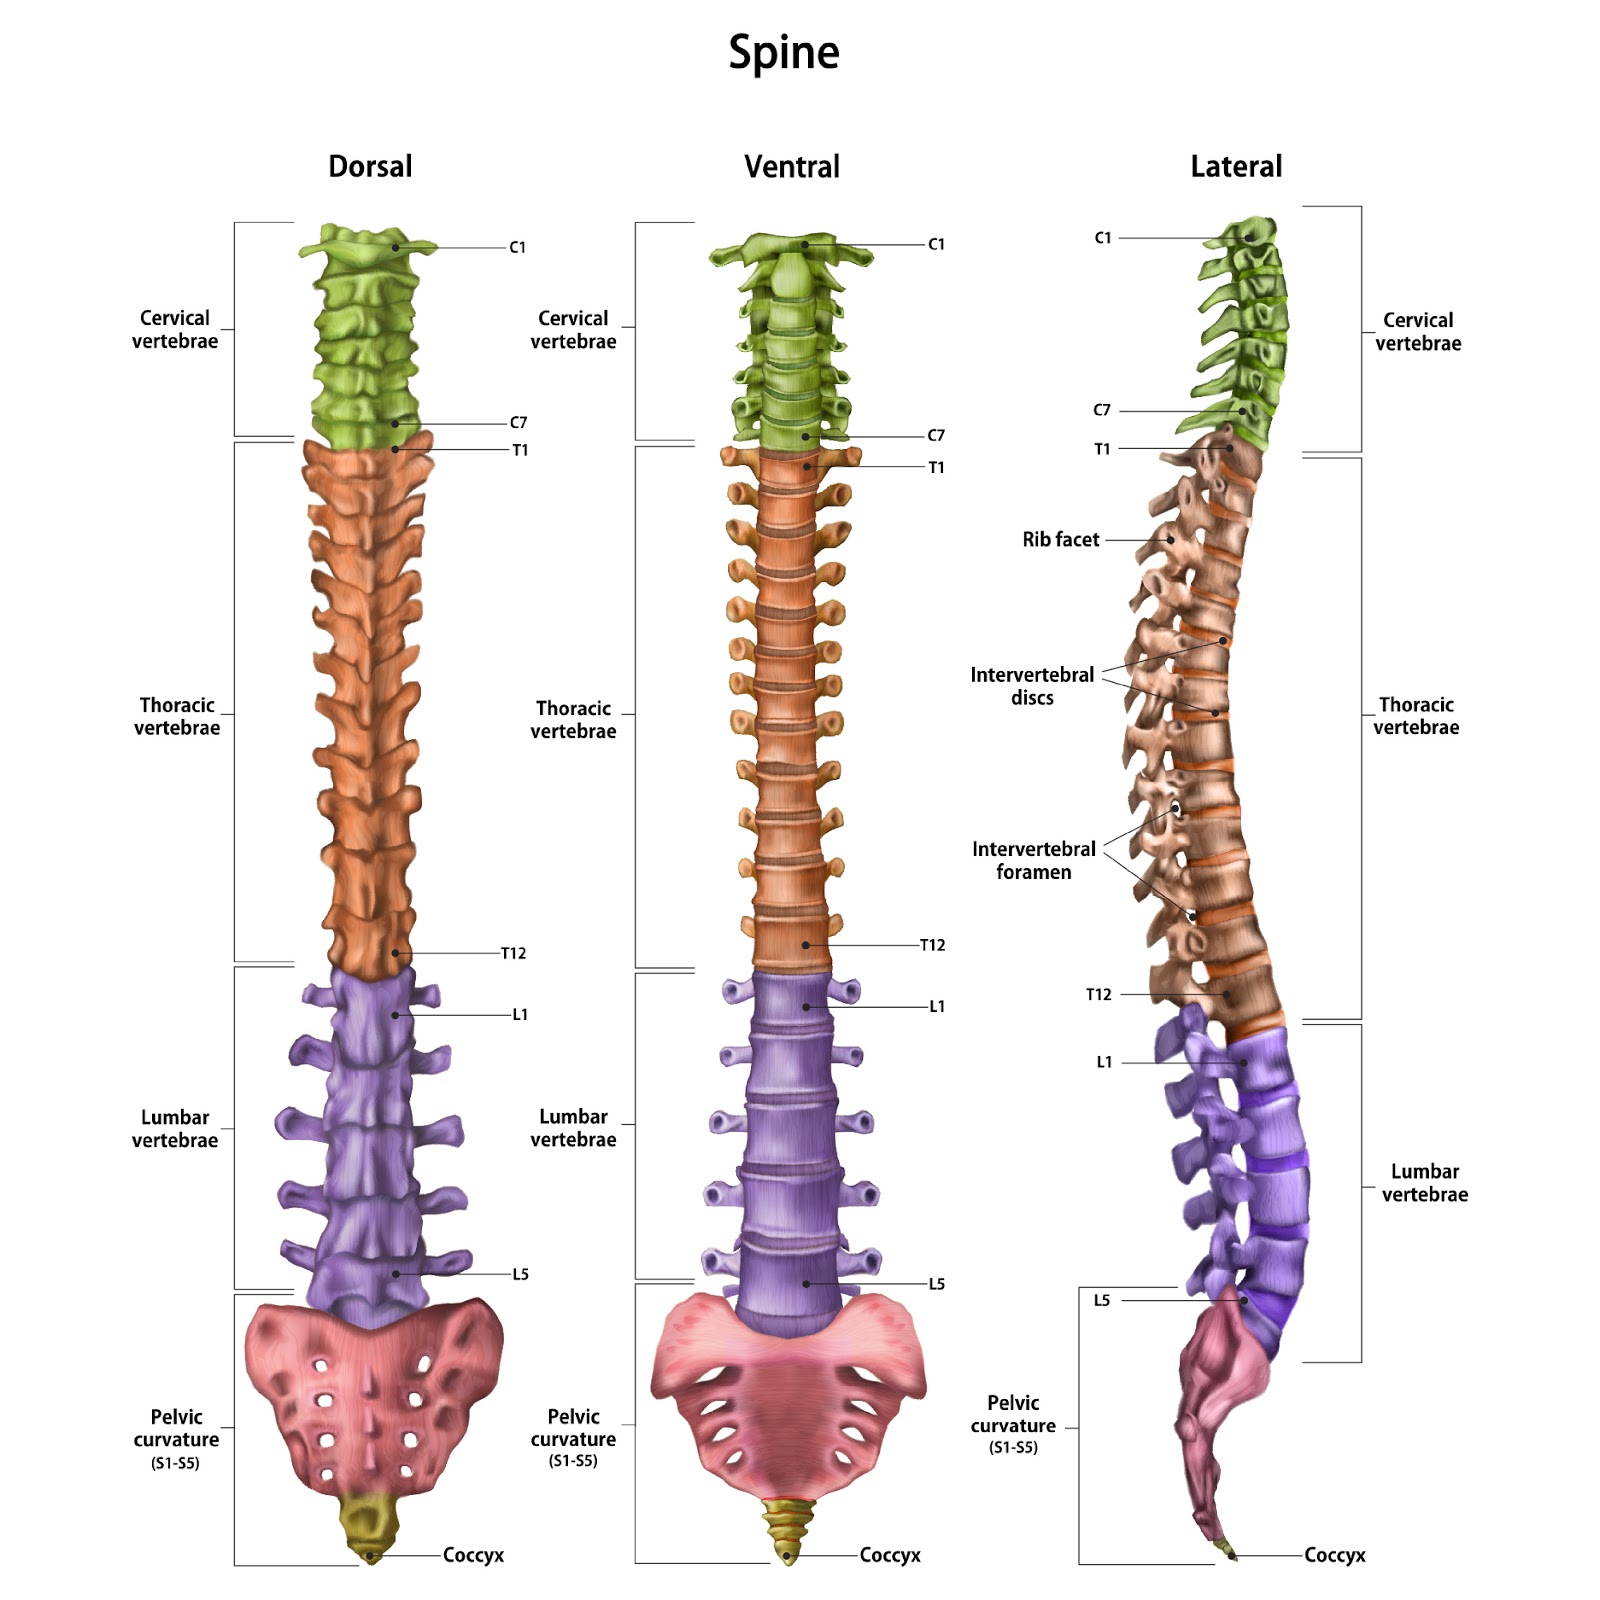 The human spine with the name and description of all sites